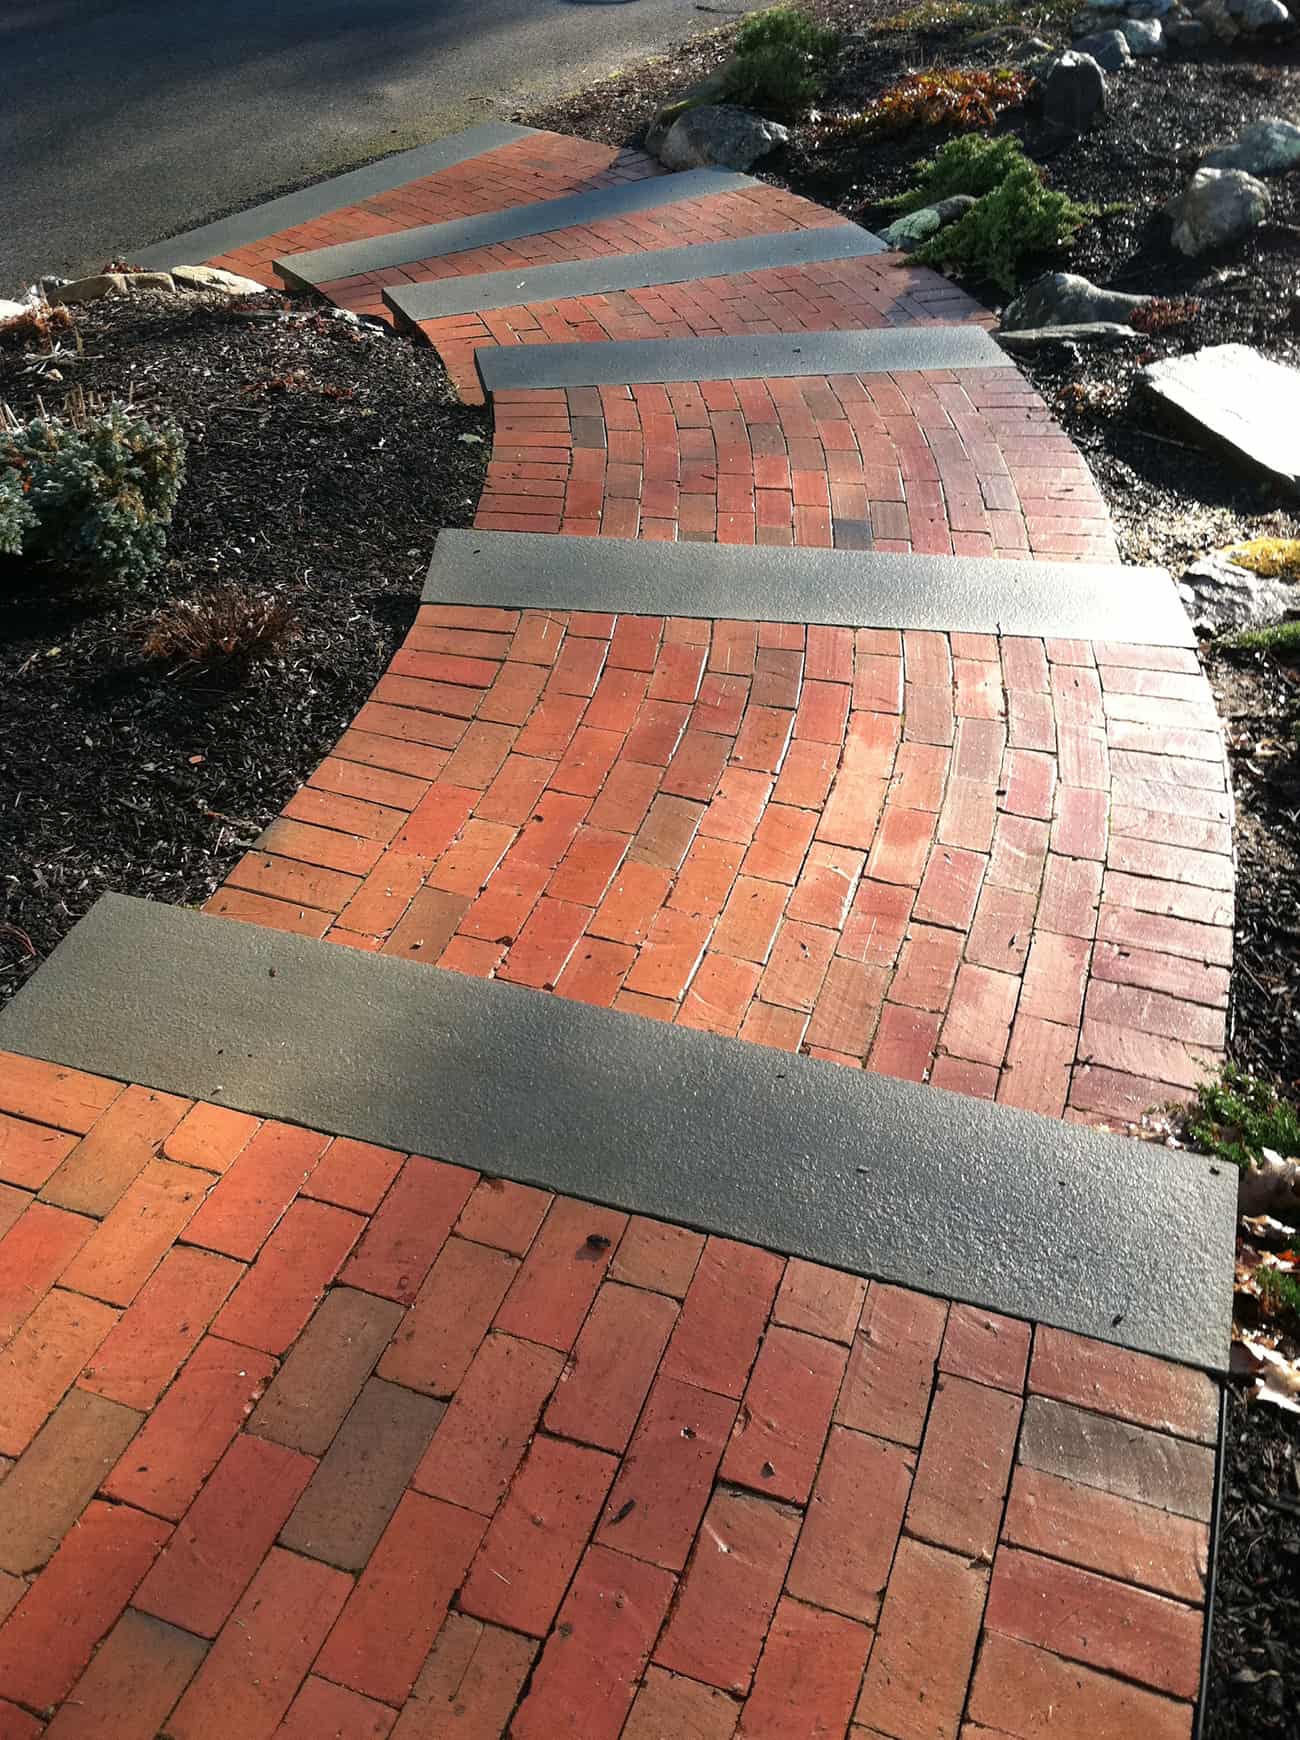 Brick pathway with stairs curving down a slope